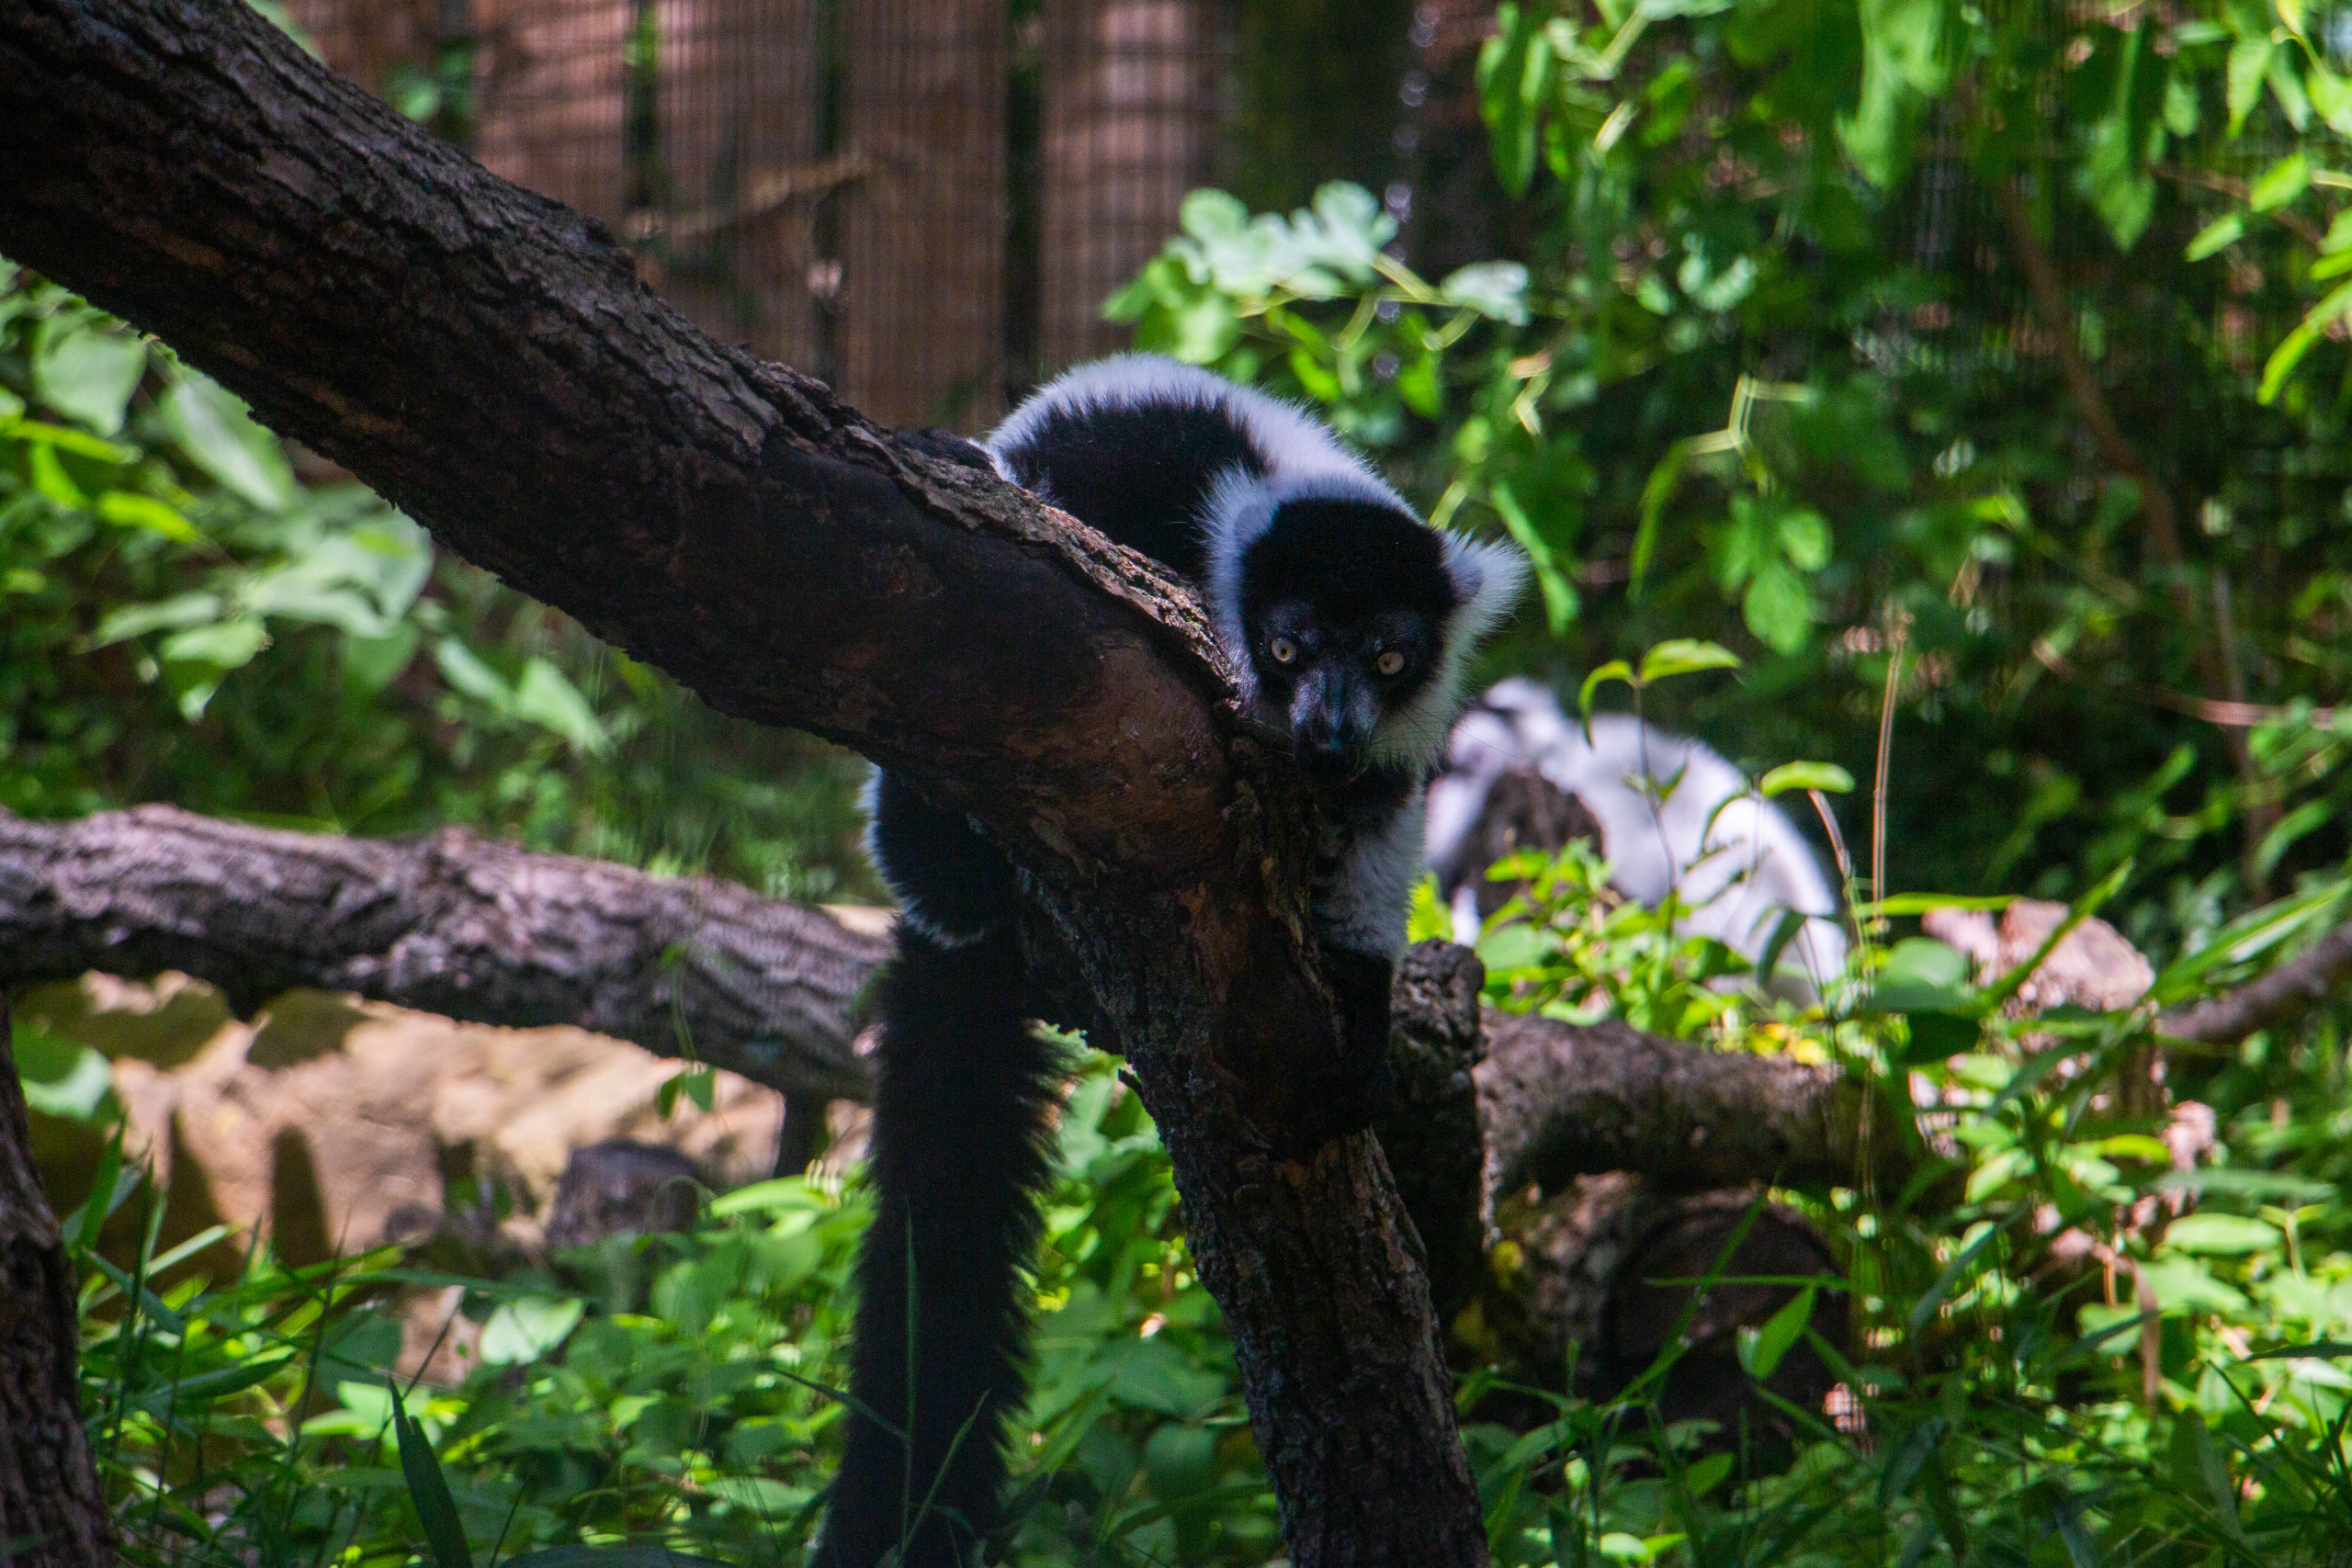 Black-and-White Ruffed Lemurs Arrive at Blank Park Zoo